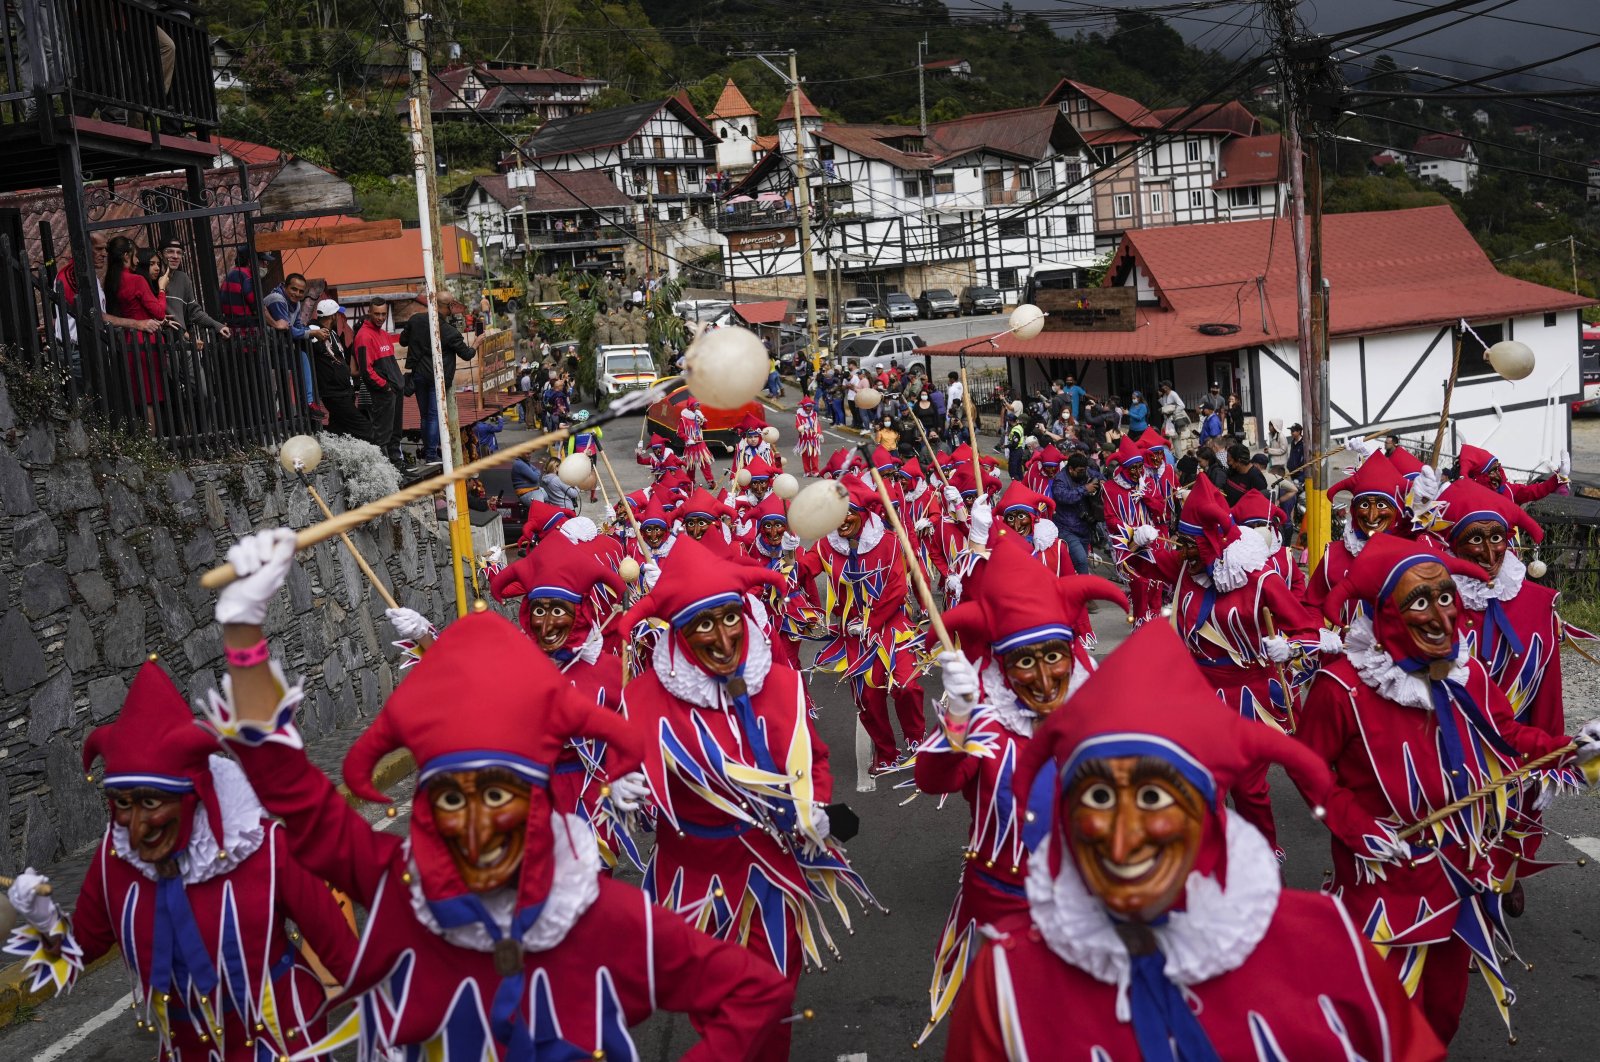 People in Jokimi costumes attend a parade during a carnival celebration in Colonia Tovar, Venezuela, Feb. 26, 2022. (AP Photo)